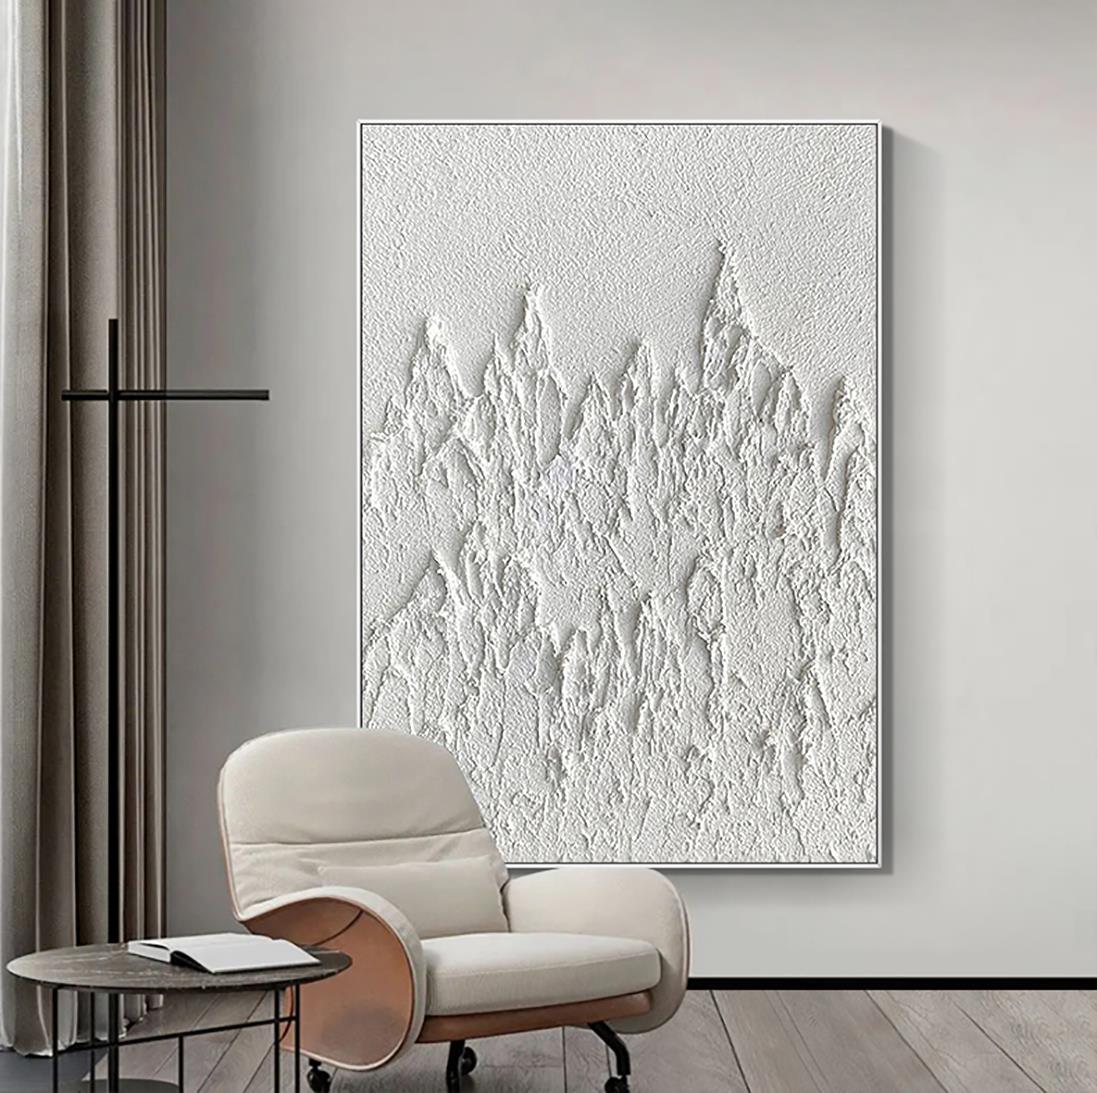 Black and White abstract mountains by Palette Knife wall art minimalism texture Oil Paintings